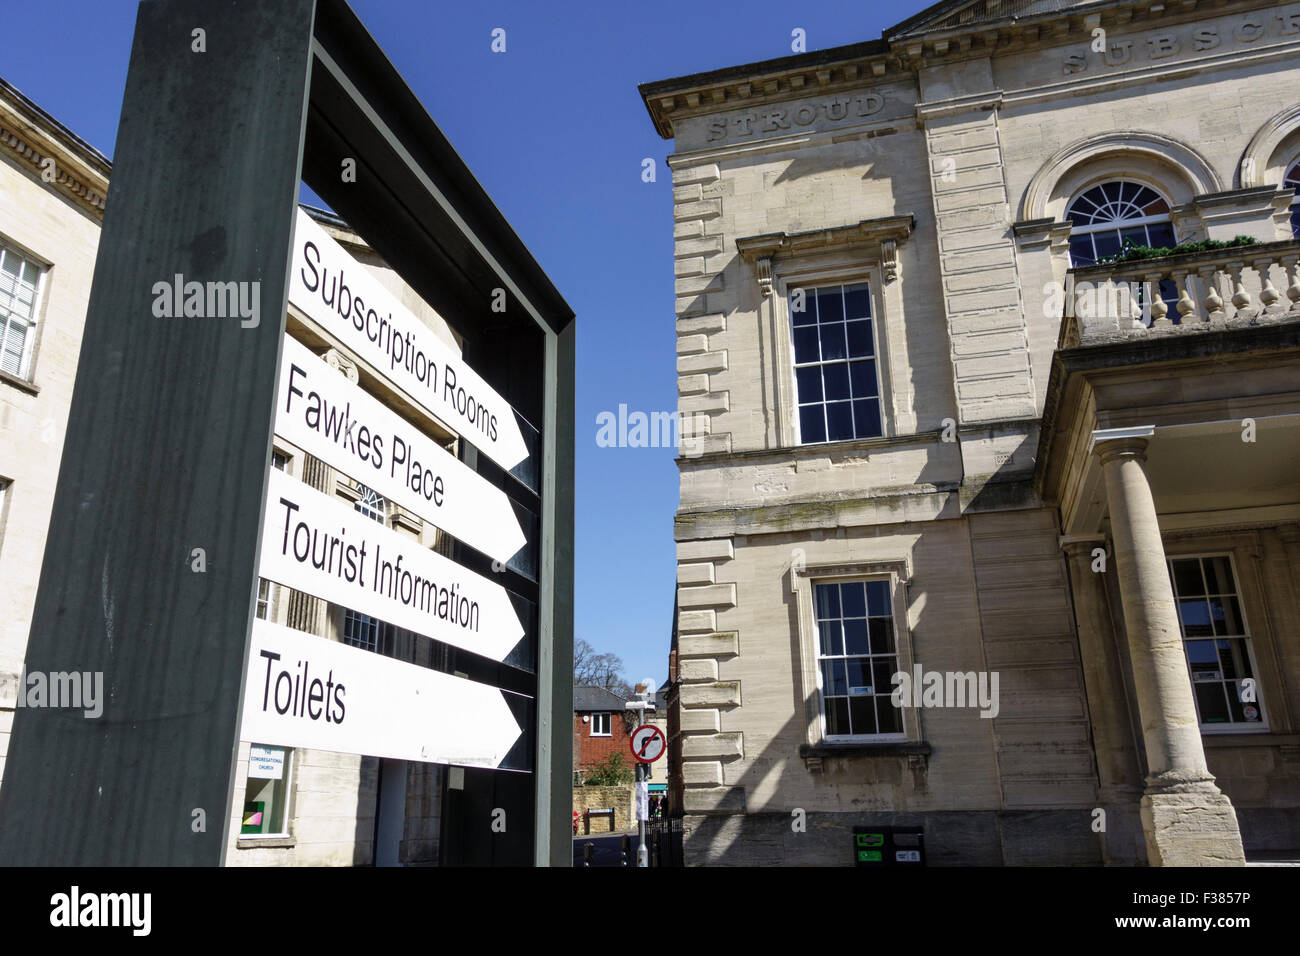 Subscription Rooms in Stroud, Gloucestershire Stock Photo